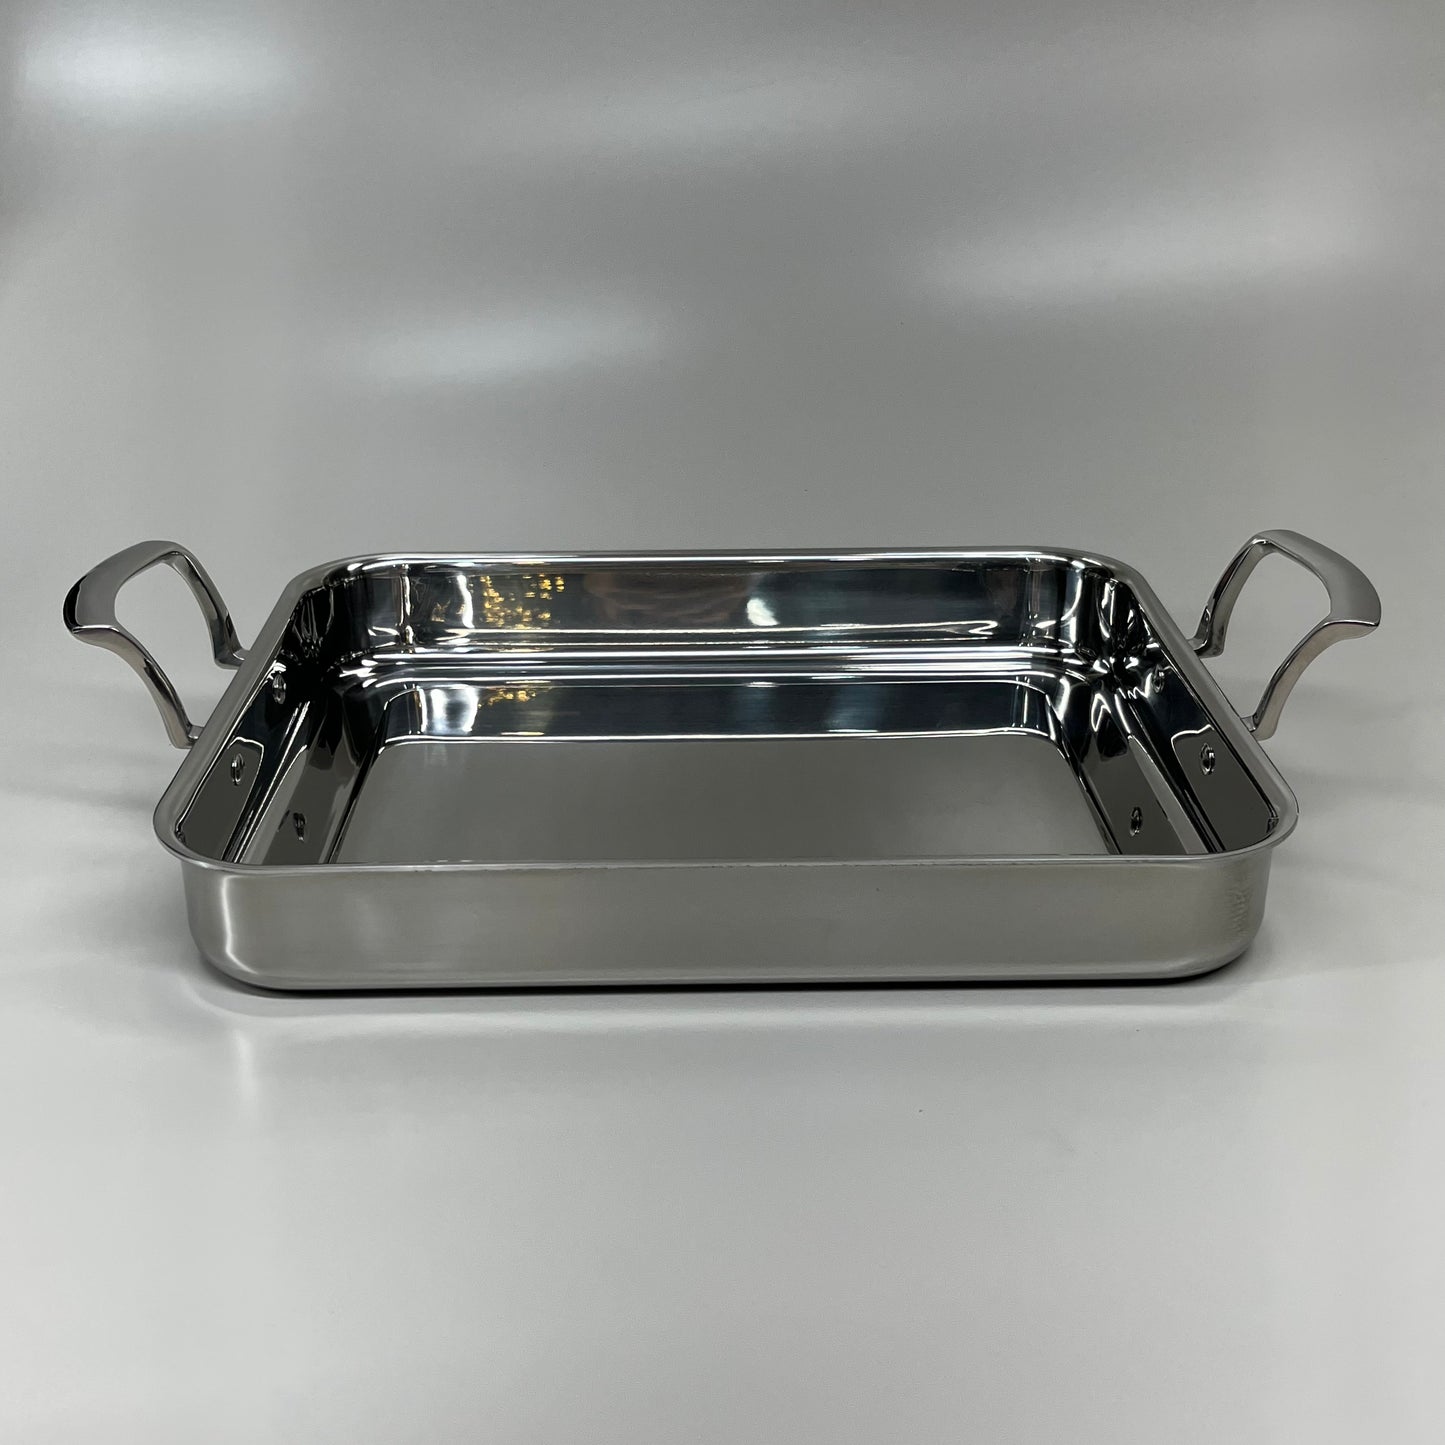 BROWNE Thermalloy Square Stainless Steel Roast Pan 14"x11.4"x2" 5724176 (New)